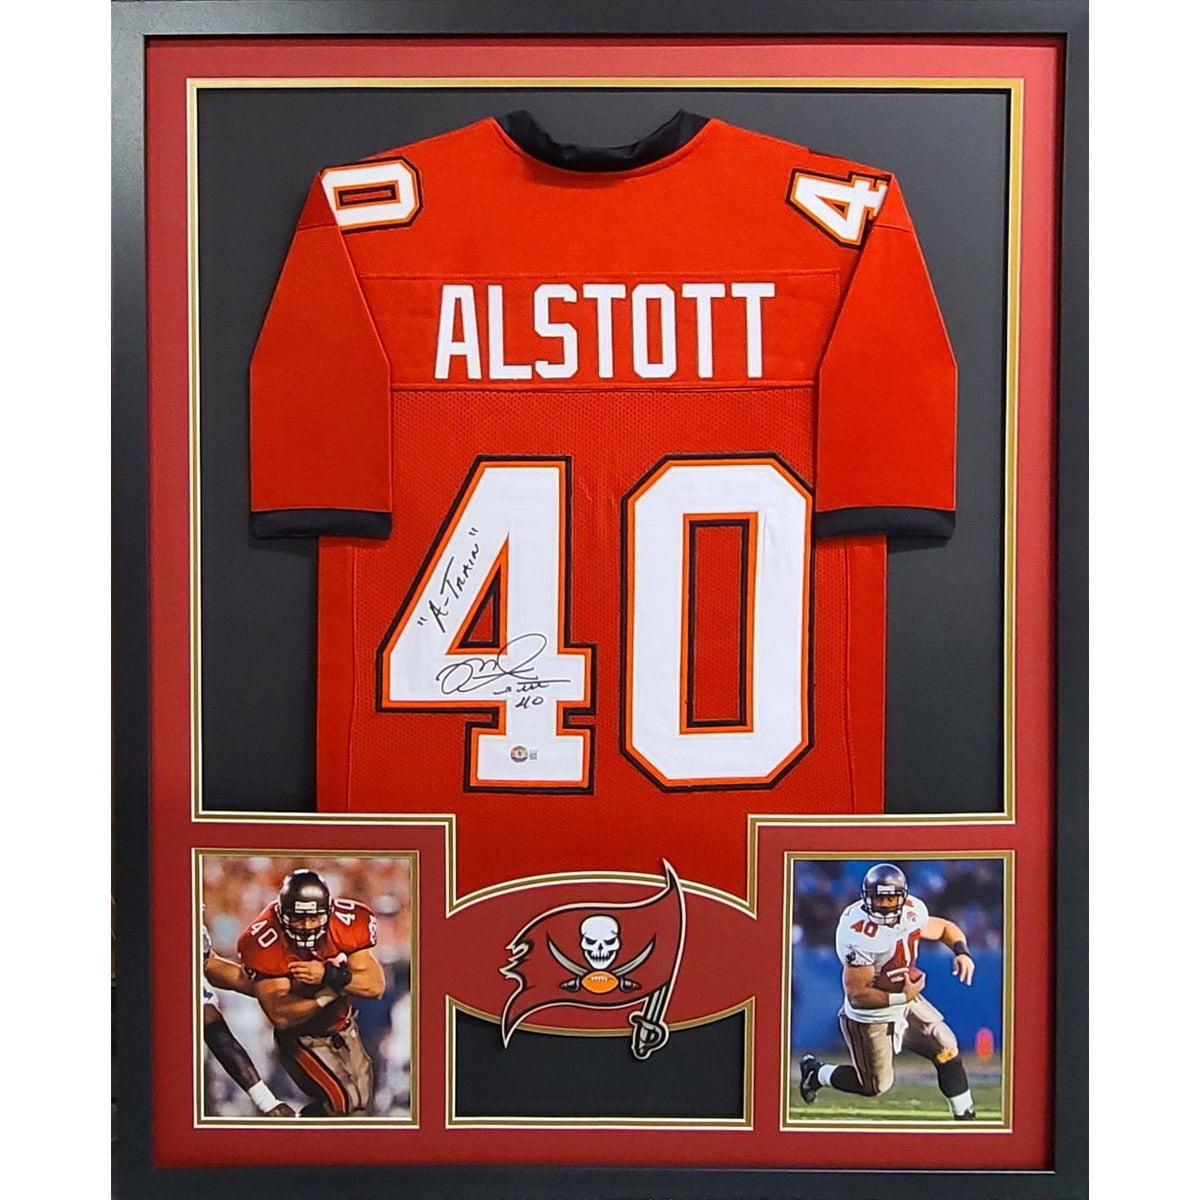 Mike Alstott Framed Jersey Beckett Autographed Signed Tampa Bay Buccaneers